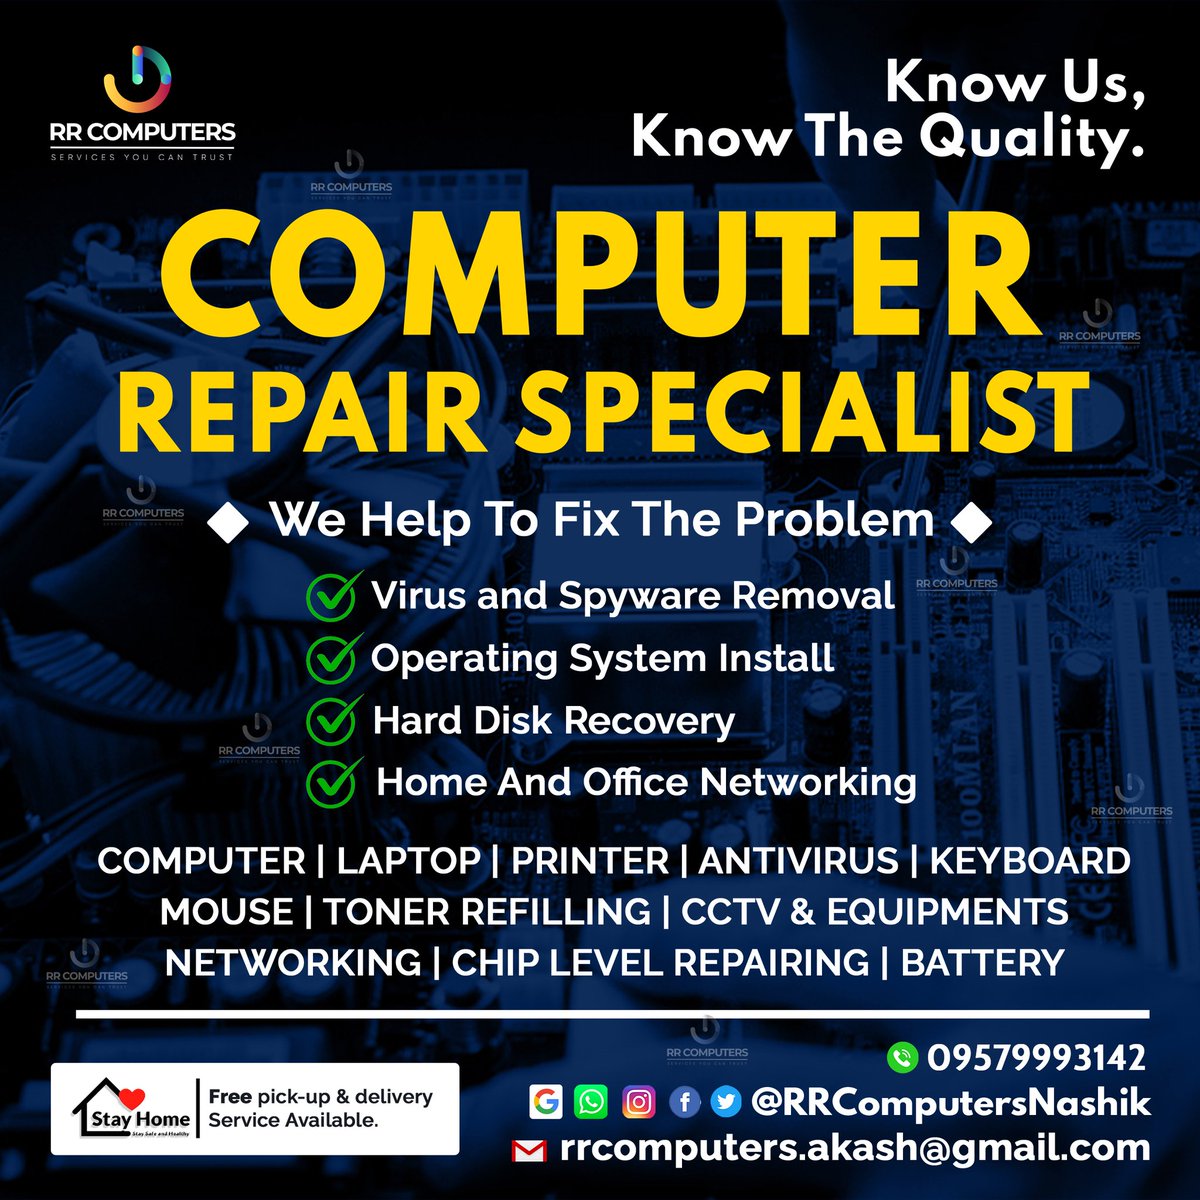 RR Computers is a specialist in computer repairing
We help you to fix the problem
Want to fix your issues 
Call 8855093142

#pcspecialist
#pcrepairing
#computerrepair #troubleshoot #fixissue
#osinstallation #hdd #networking